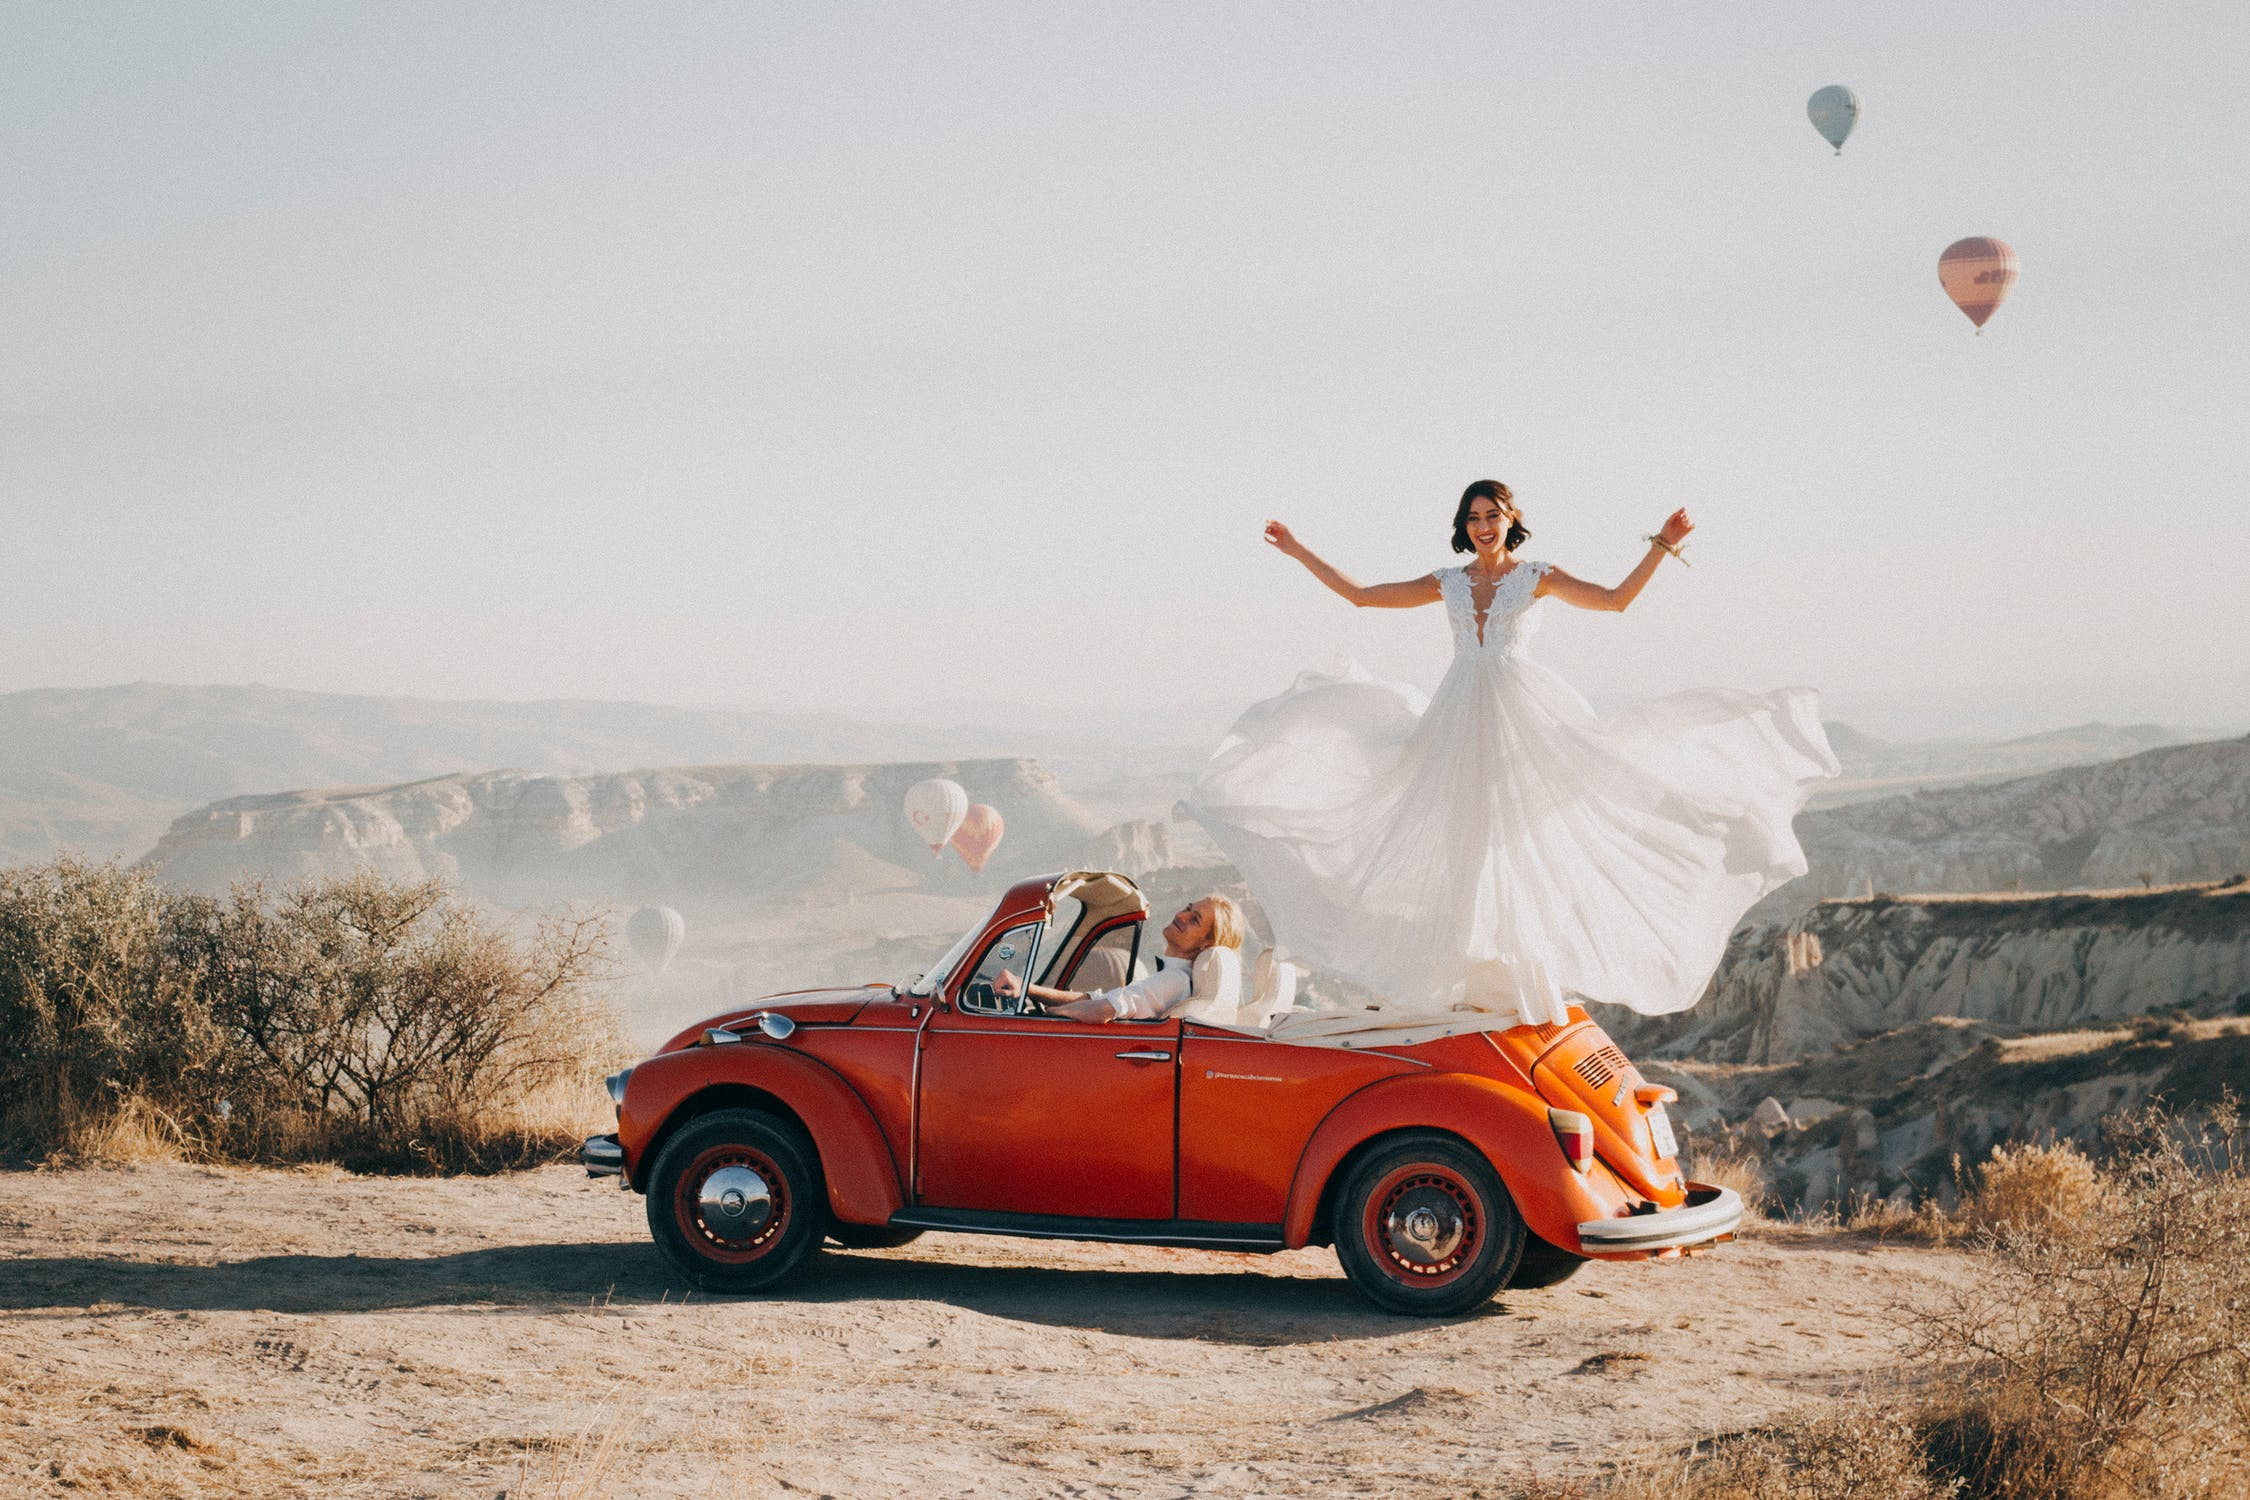 4 Stylish Tips That Will Make Your Elopement Wedding Stand Out